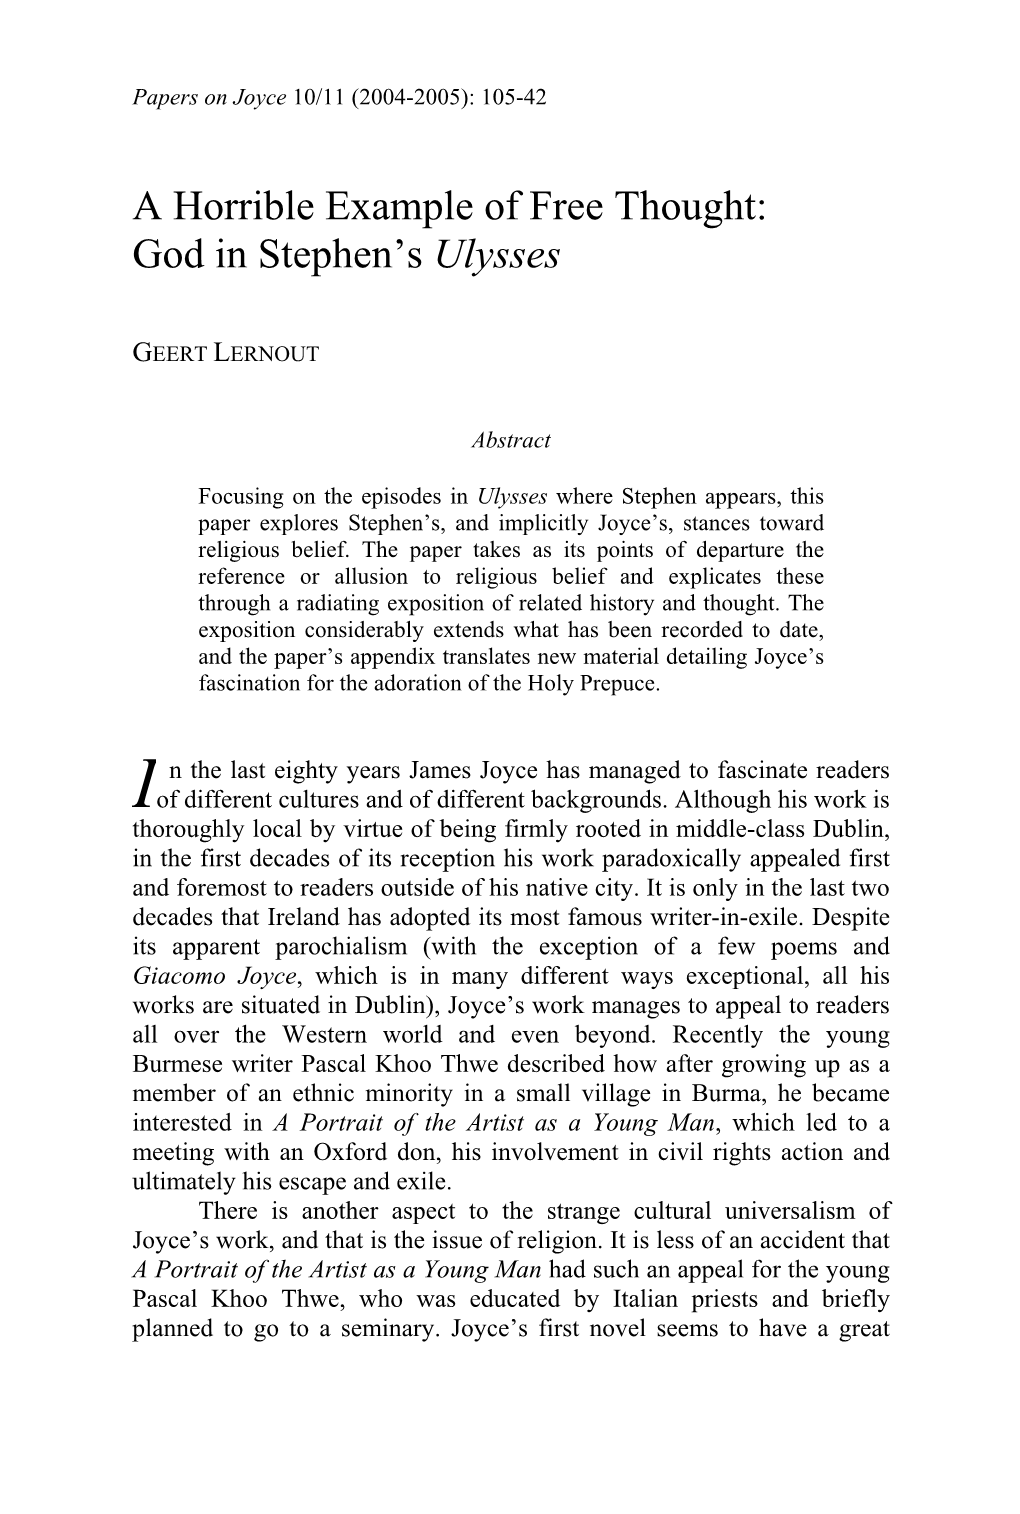 A Horrible Example of Free Thought: God in Stephen's Ulysses